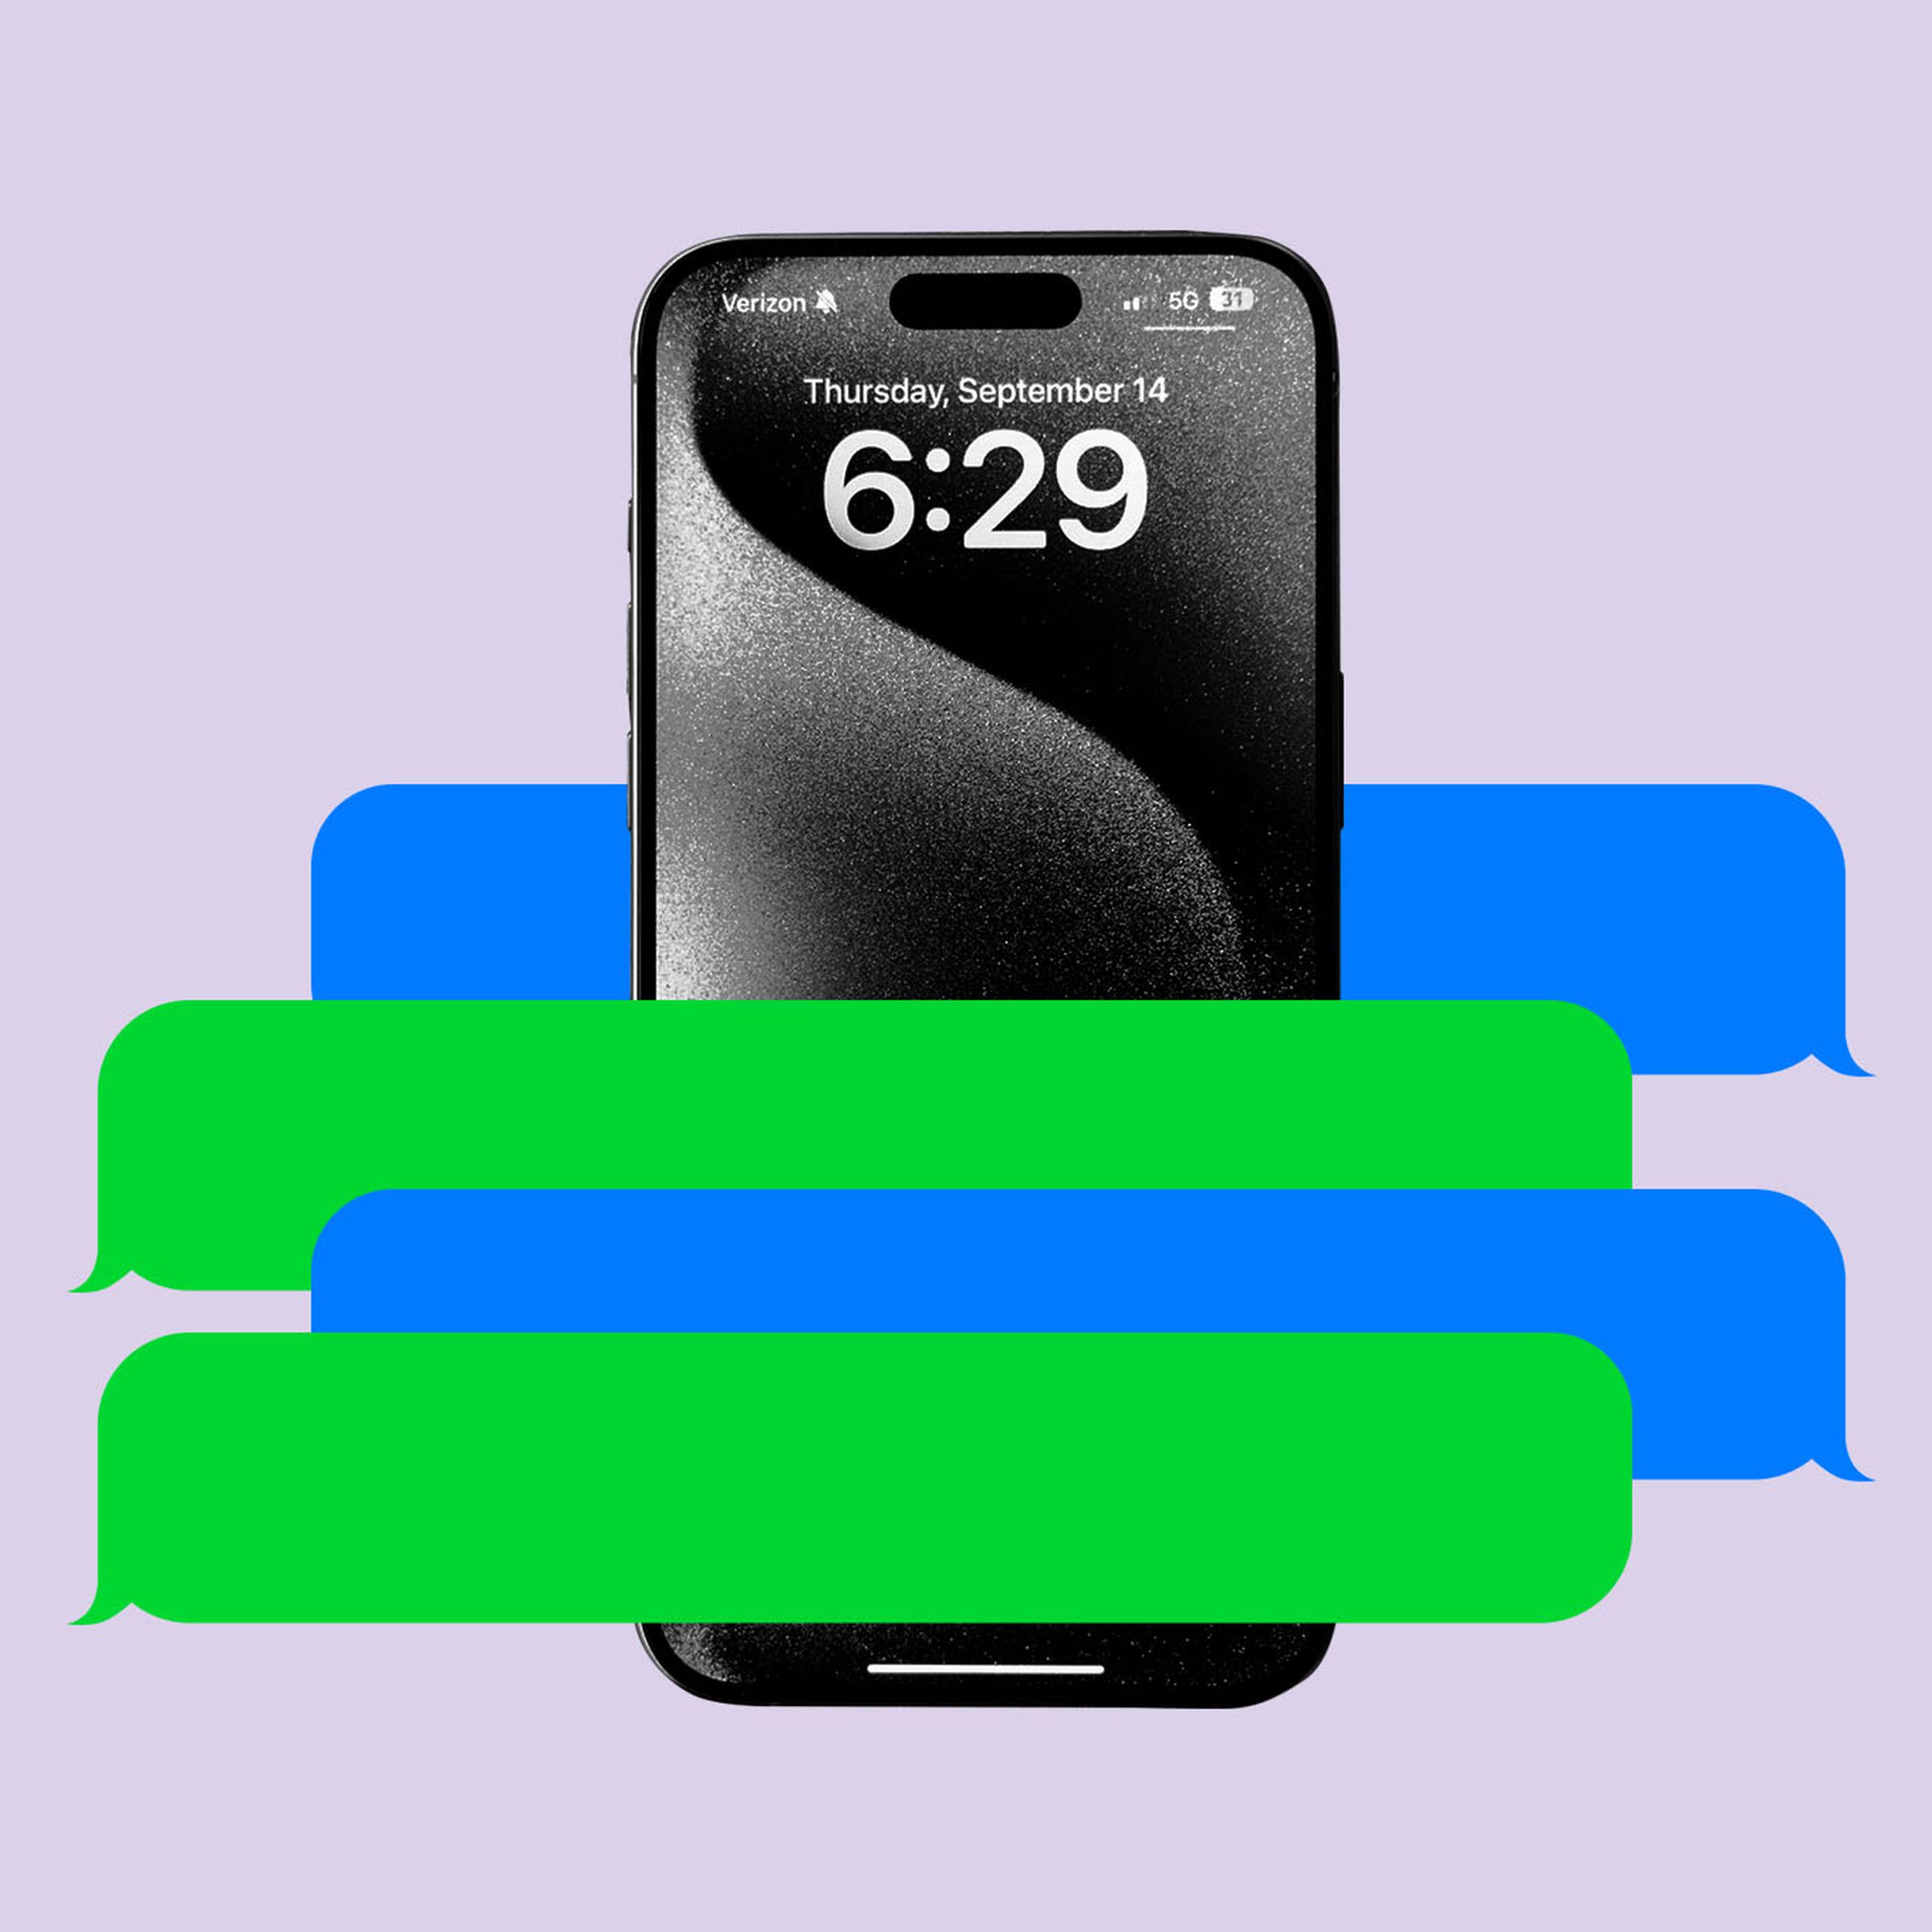 Illustration of an iPhone surrounded by green and blue message bubbles.